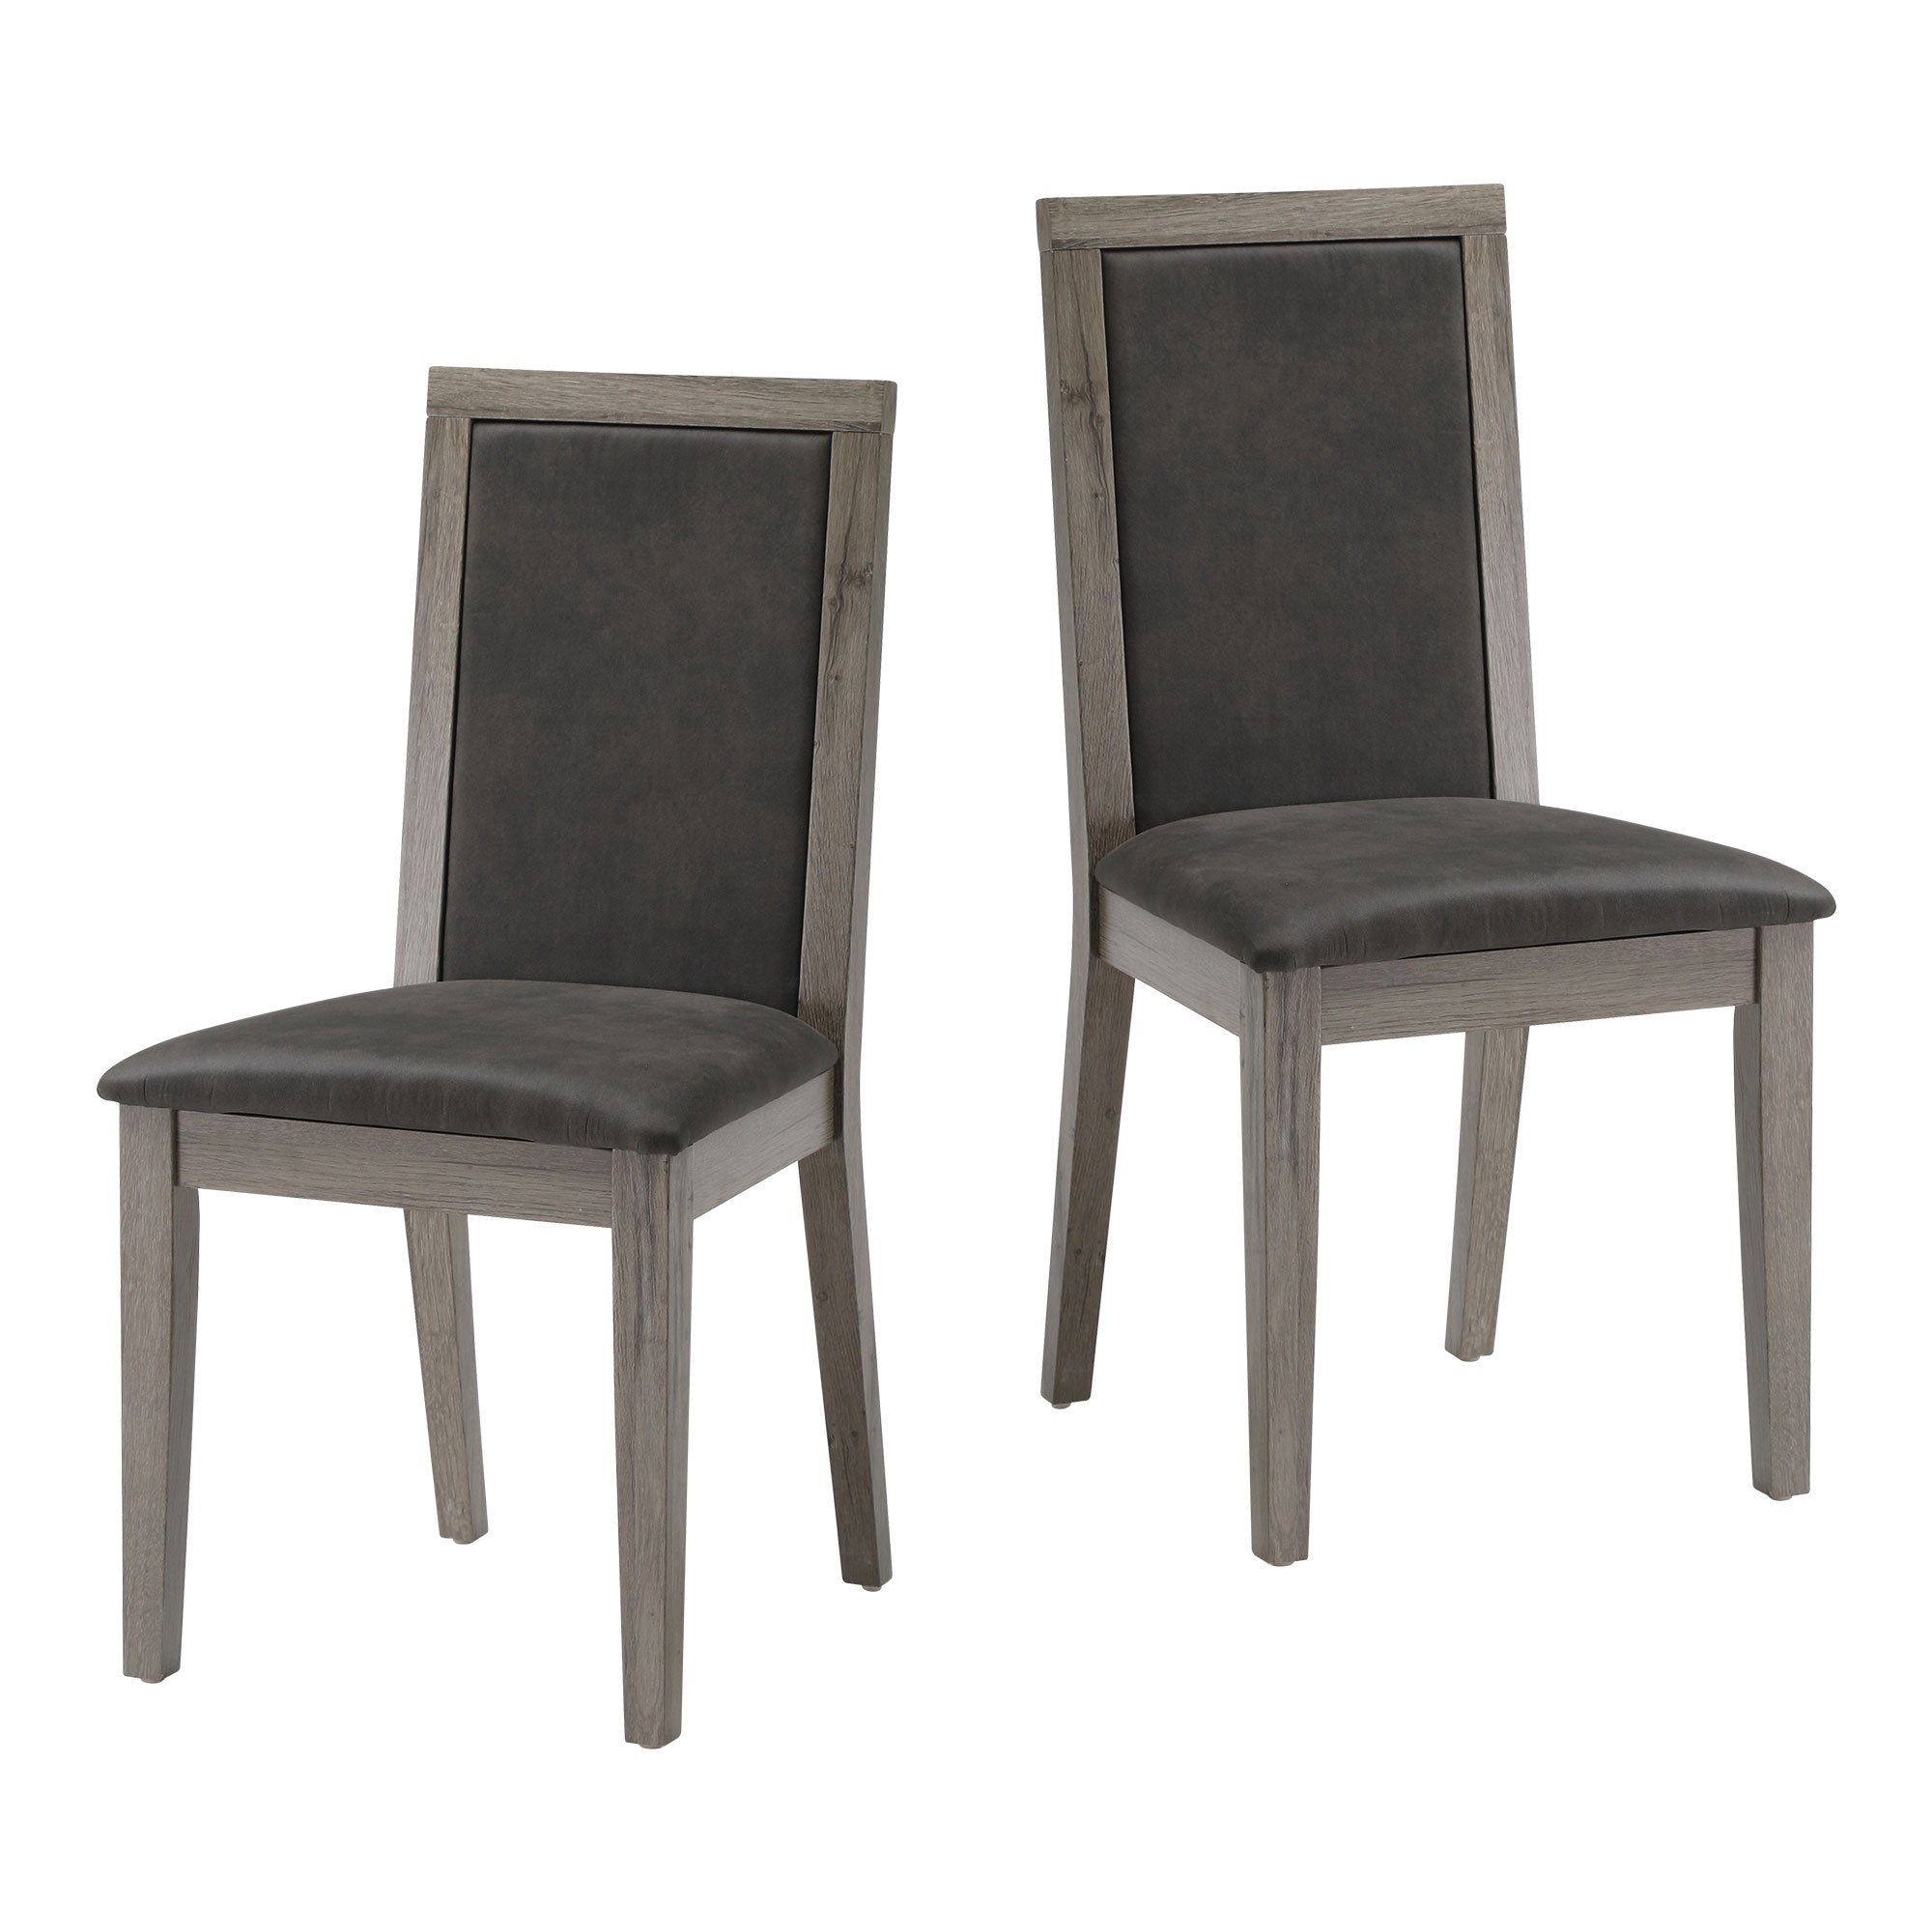 Dining Chairs Set of 2 Wood Dining Room Chair with MDF dark gray-foam-wood